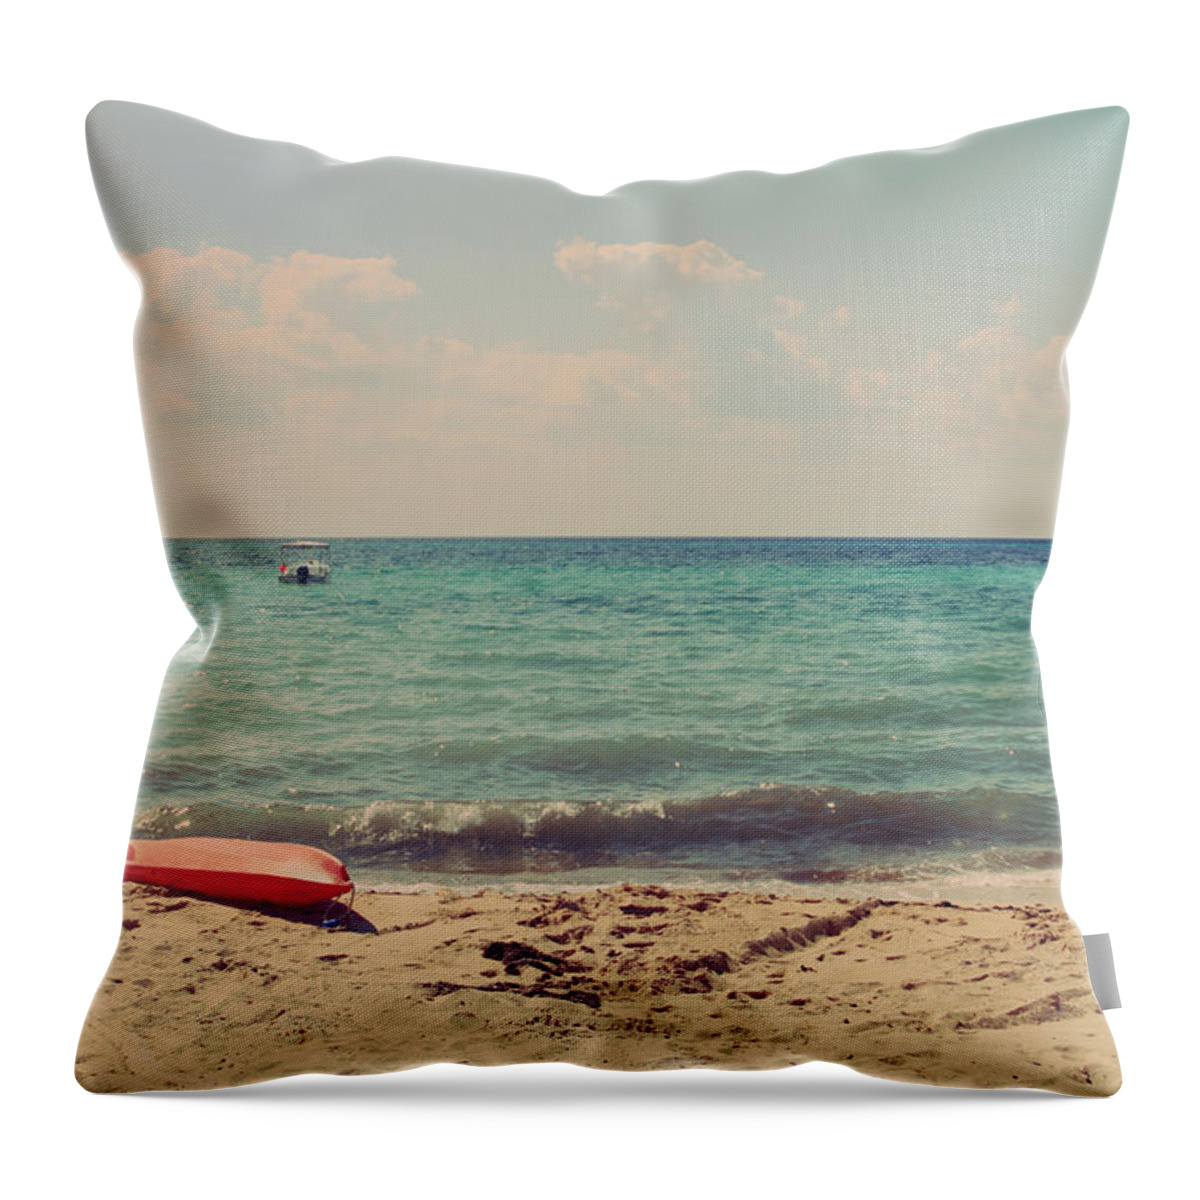 Cozumel Throw Pillow featuring the photograph Carefree by Laurie Search